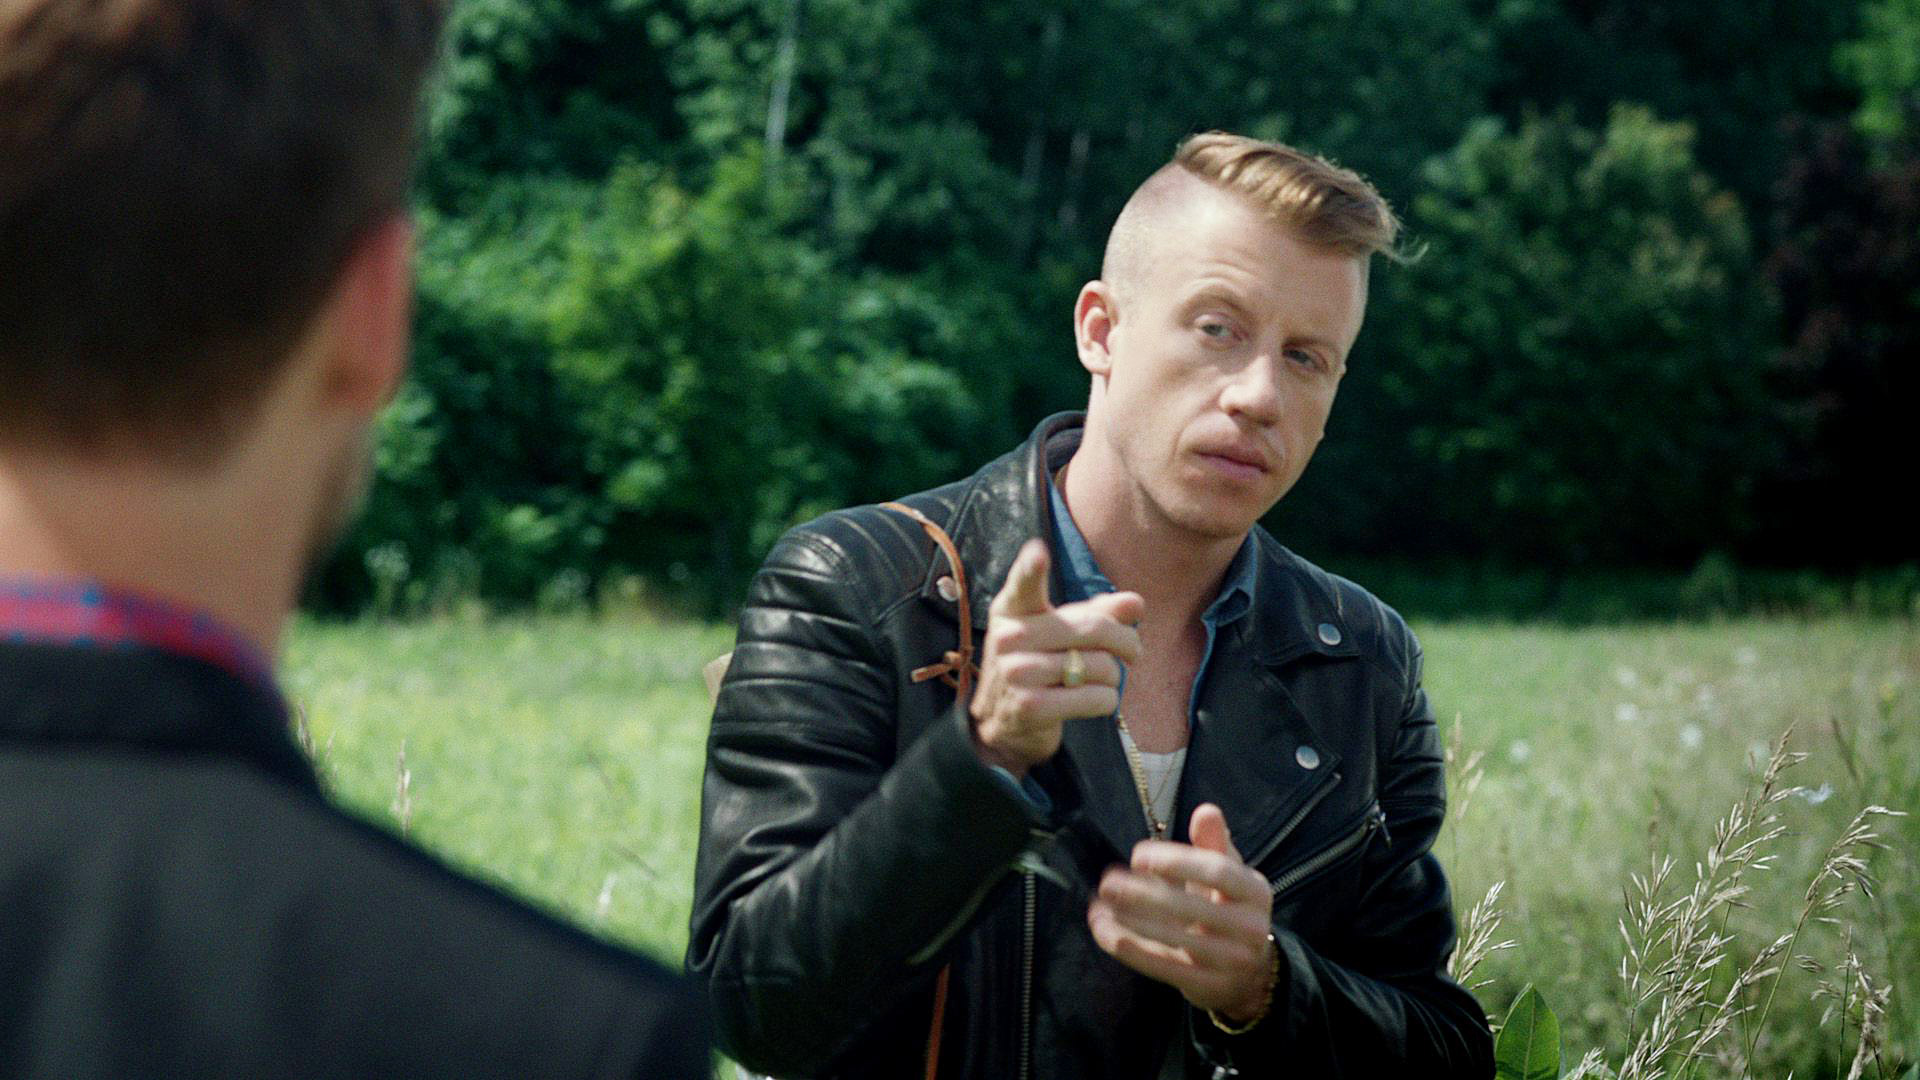 VMA 2013: Macklemore & Ryan Lewis Are Coming For You